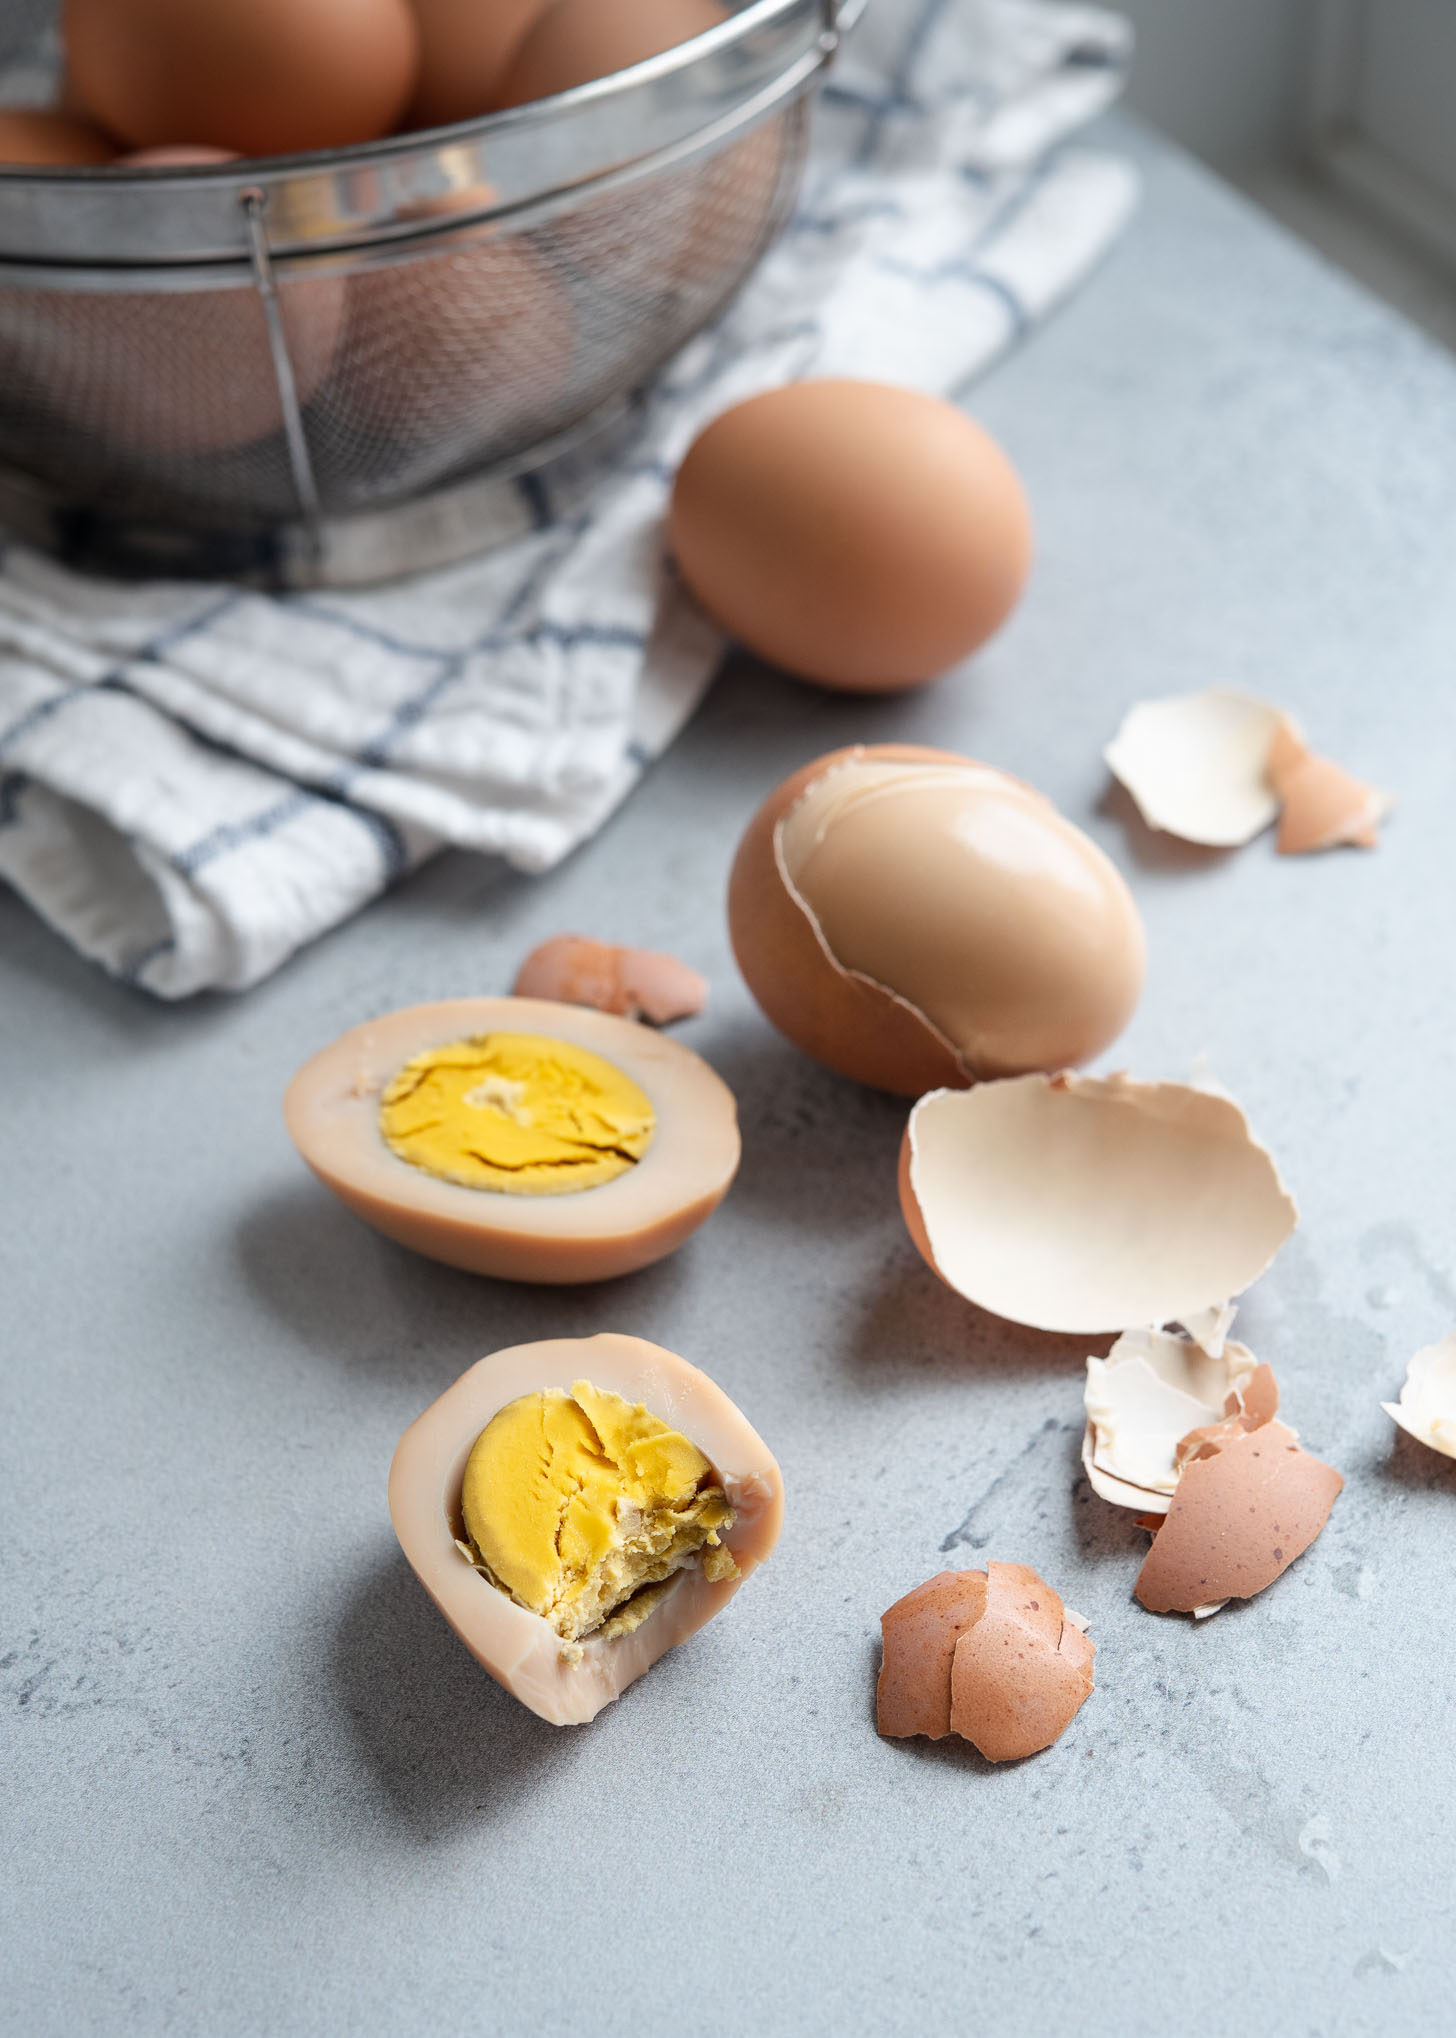 Korean sauna eggs have nutty brown on the egg white part and rich egg yolks inside.